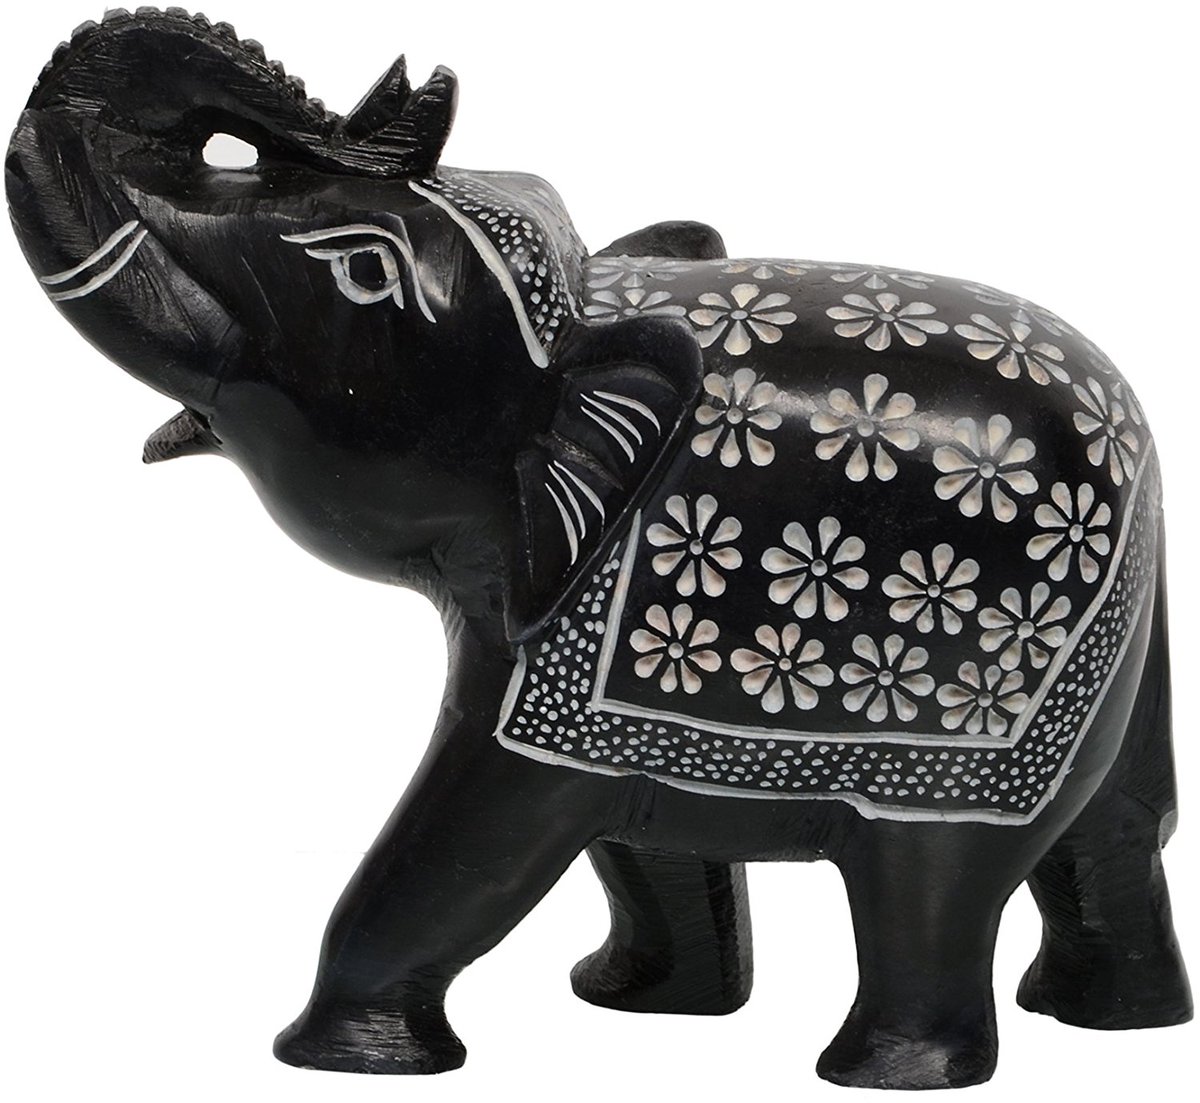 Handcrafted Marble Elephant for your home and office!
#MarbleStatue #HandmadeGifts #DecorativeGifts #MarbleHomeDecor #DecorStatue #DesignedByHeart #HandCrafted #MadeInIndia #MarbleHandicraft #FineCraftsOfIndia #CorporateGifts #Amazon #MarbleProducts